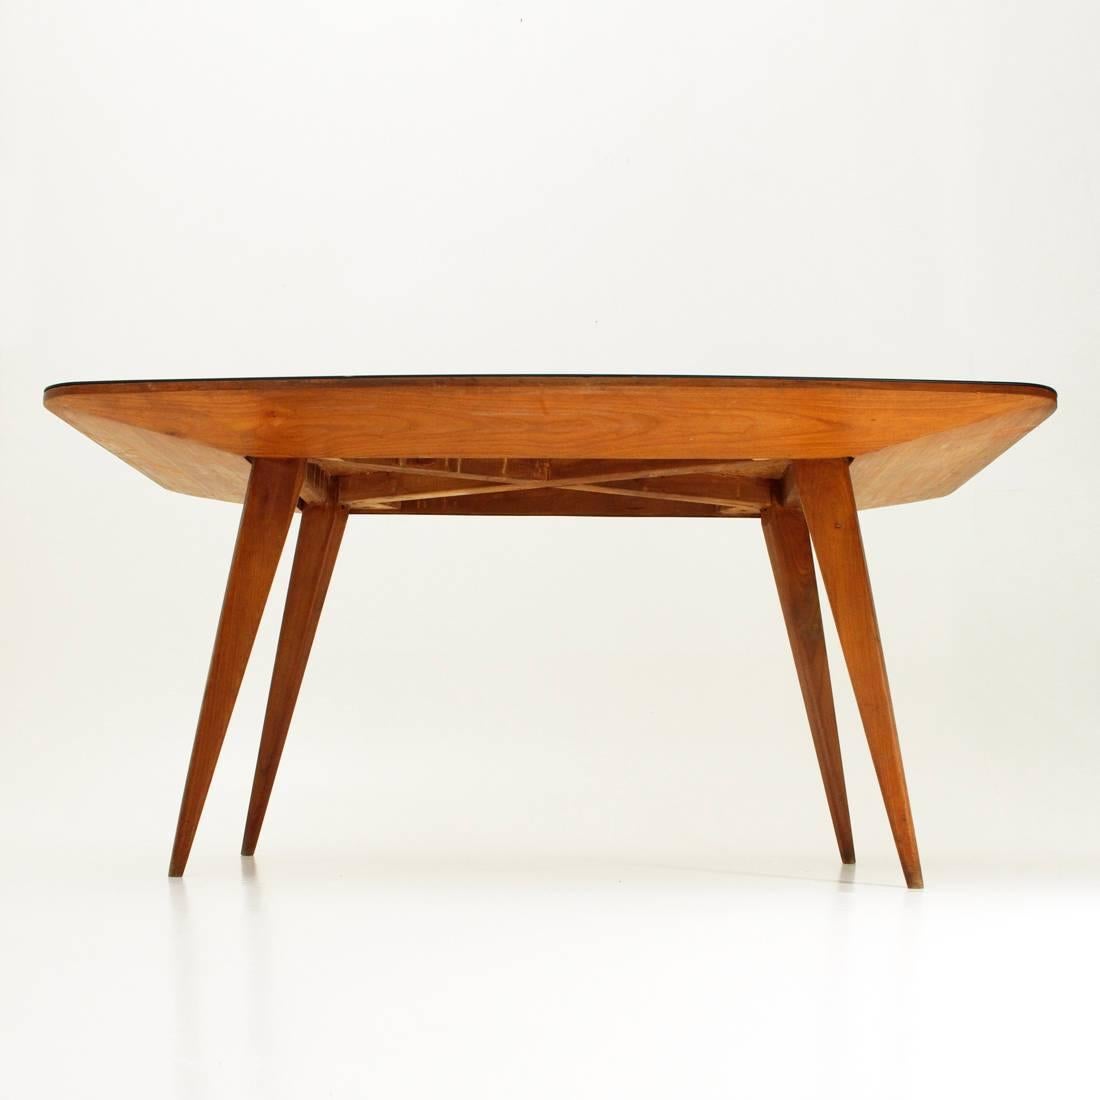 Mid-20th Century Italian Wood Dining Table with Black Glass Top, 1950s